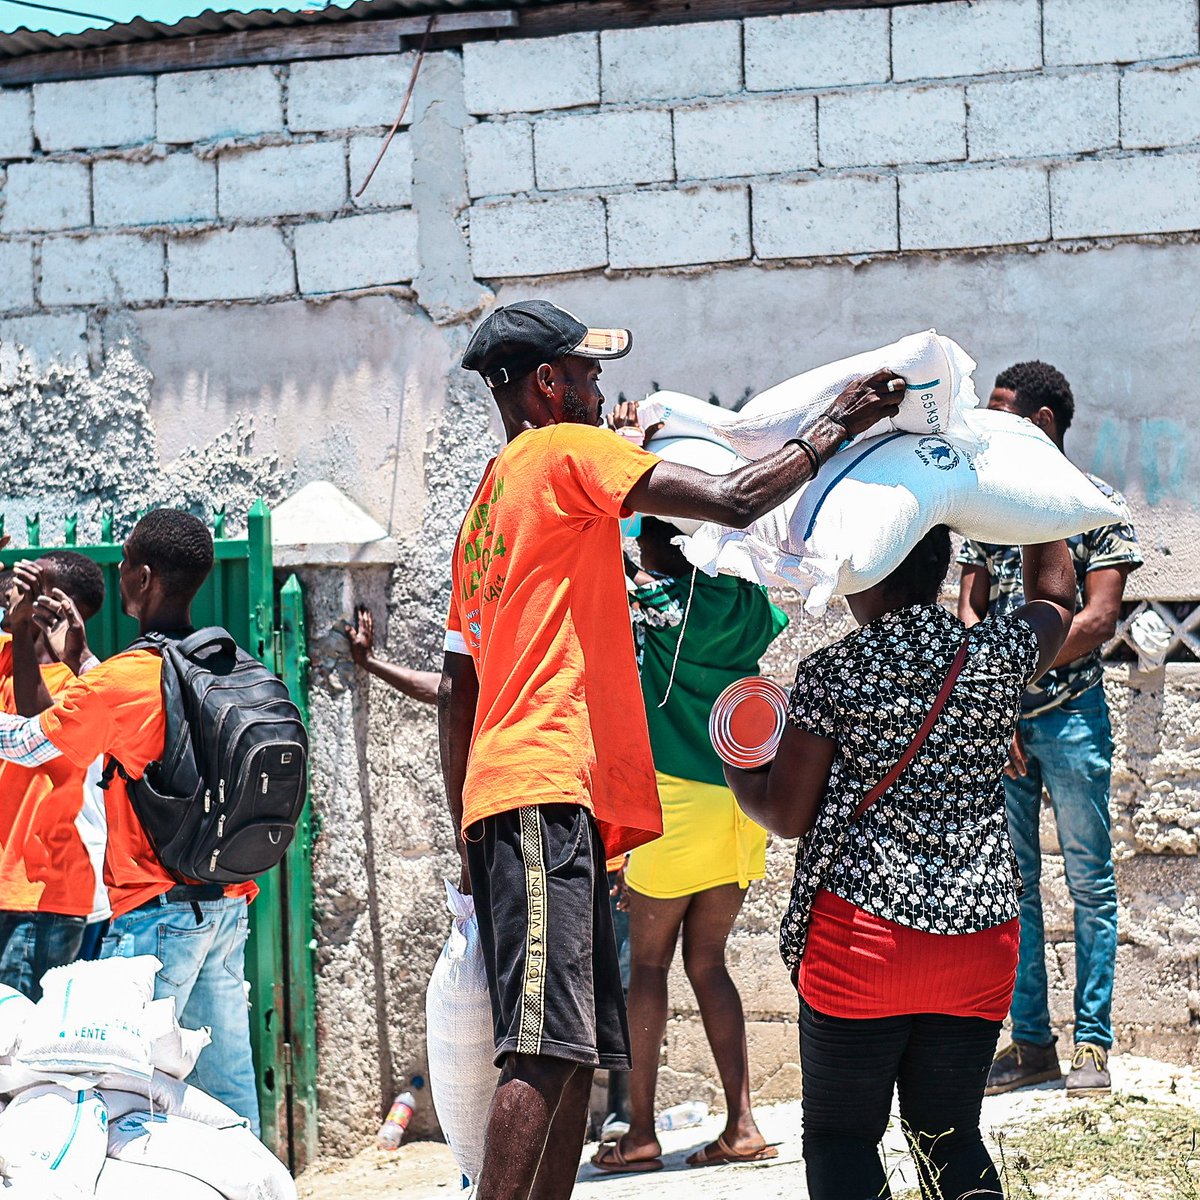 Last week, over 63,000 people living in Cité Soleil, an area experiencing acute levels of food insecurity in #Haiti, received over 400 tons of food supplies. @WFP is grateful for @USAIDSavesLives' critical support and for teaming up with such dedicated local associations🙏